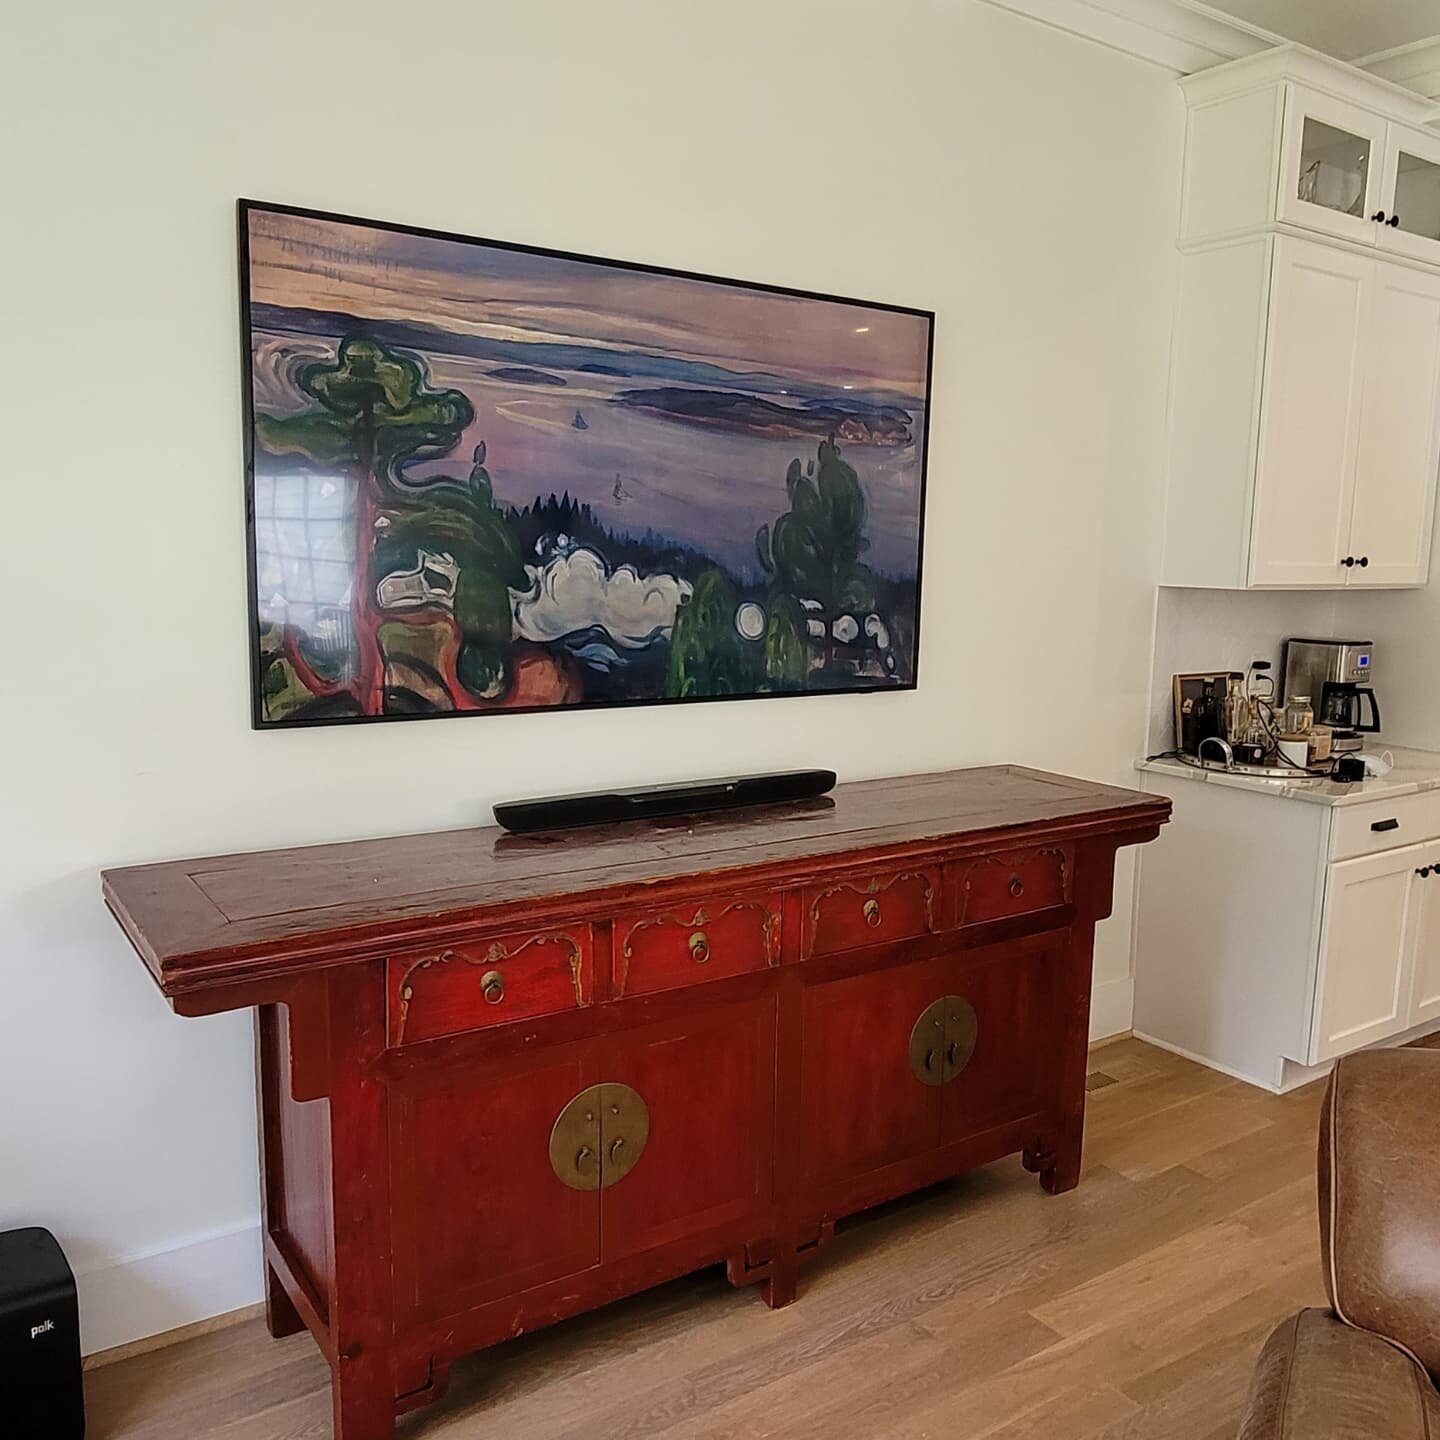 75&quot; @samsungus Frame TV wall mounted with black frame and connected to @polkaudio Magnifi One soundbar. (TV shown in Art Mode 🖼 ) 

#quality #clarity #craftsmanship #jaaudiorva #audiovisual #audio #video #media #construction #fireplace #interio